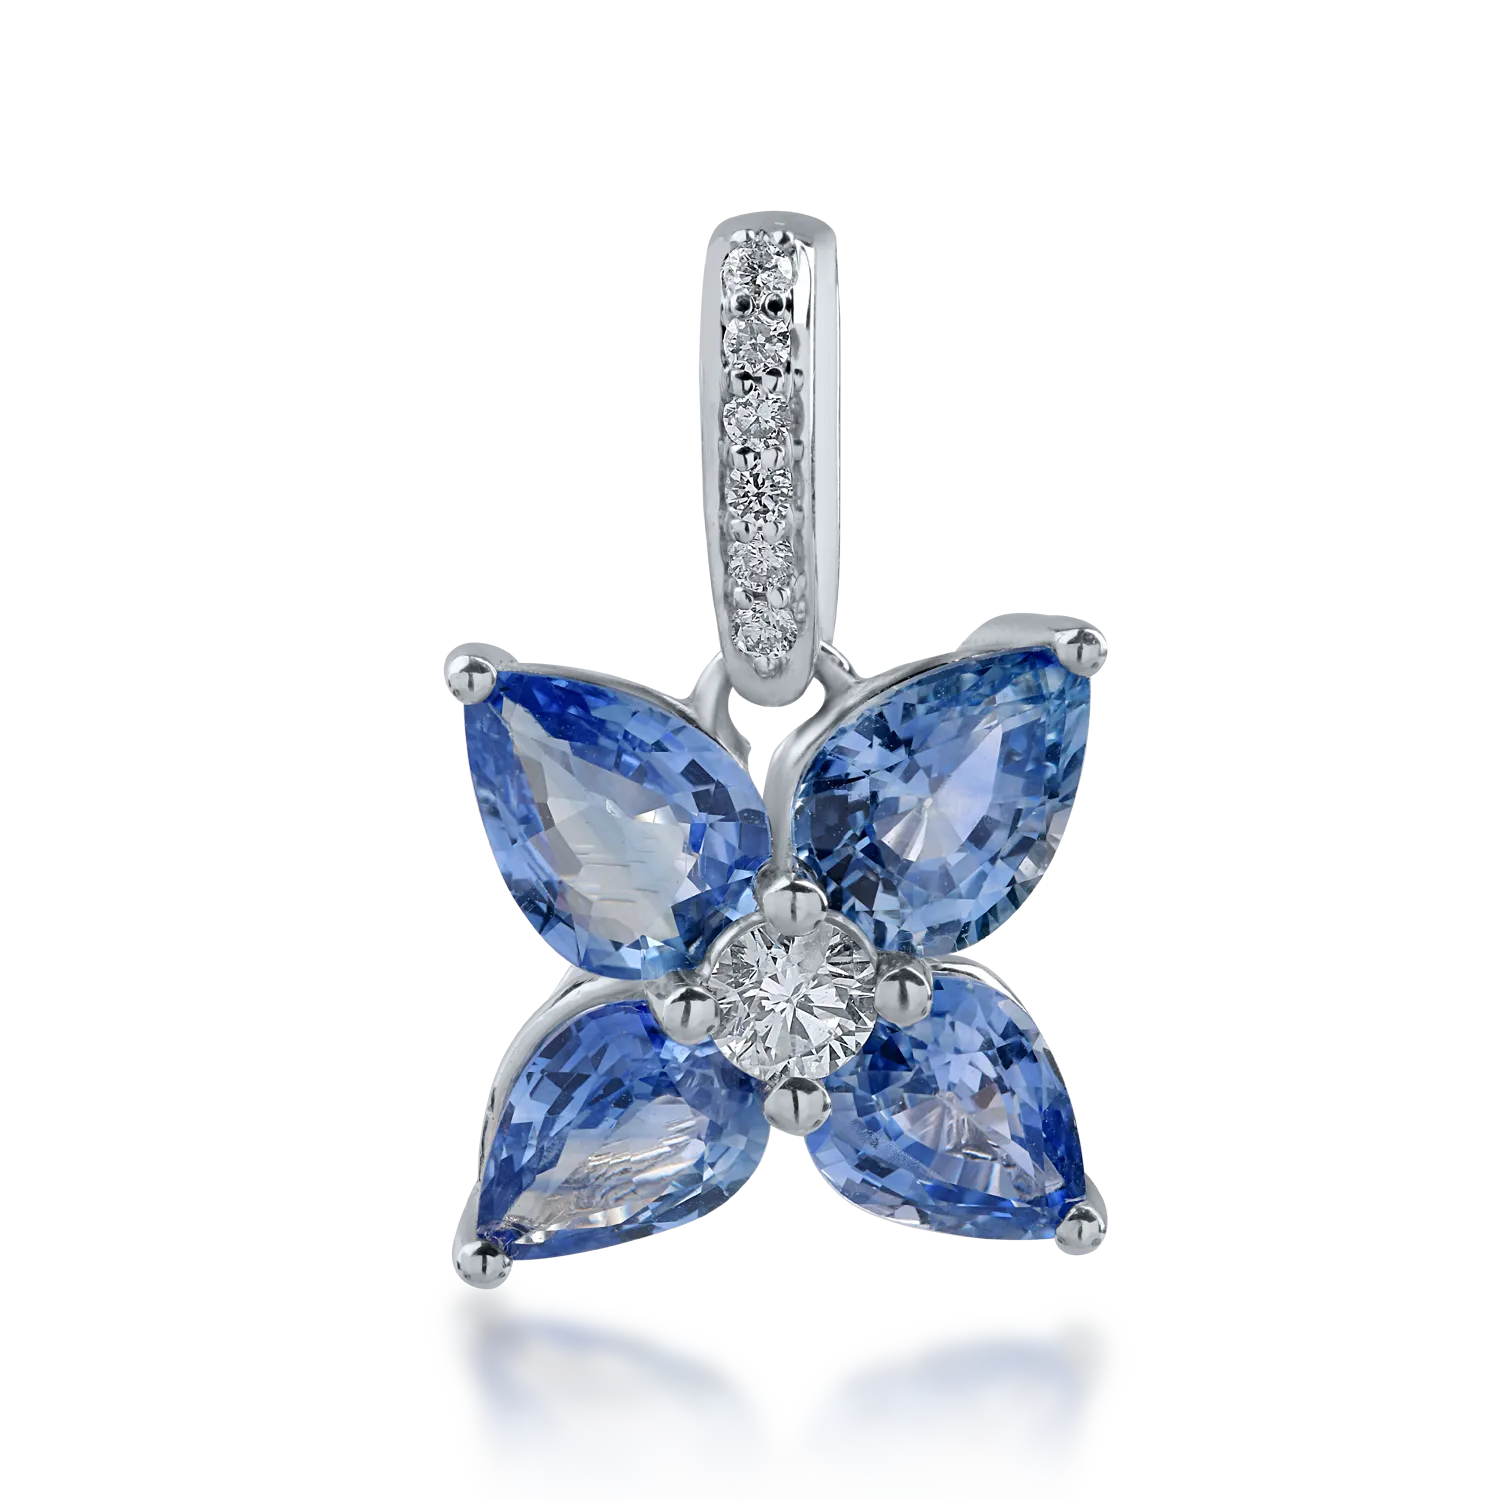 White gold flower pendant with 3.13ct heated sapphires and 0.2ct diamonds